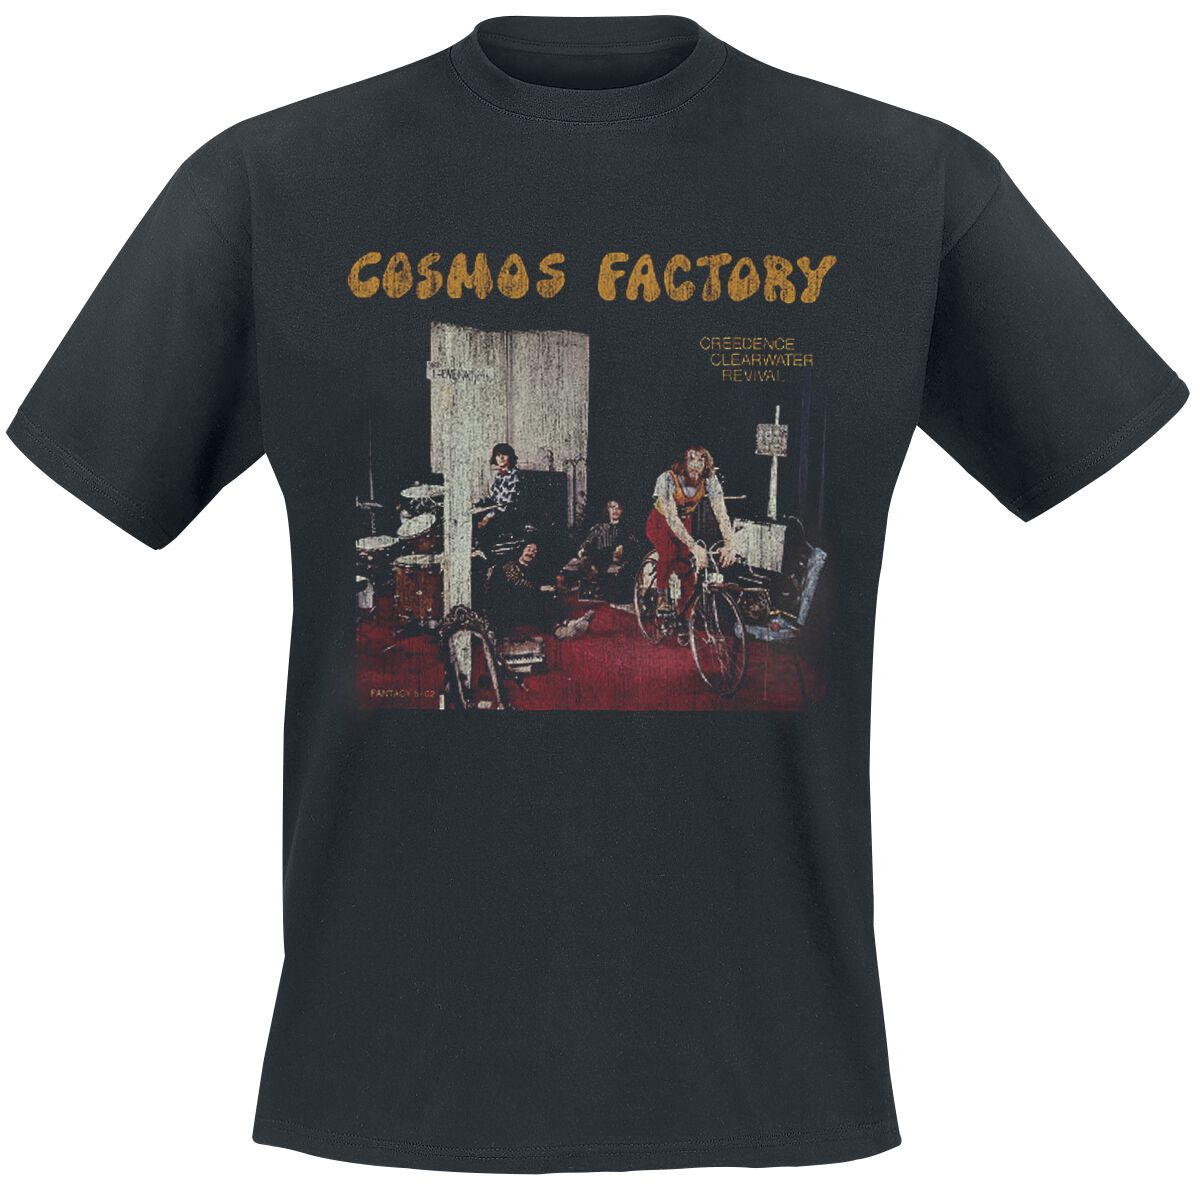 Creedence Clearwater Revival (CCR) Cosmos Factory T-Shirt black